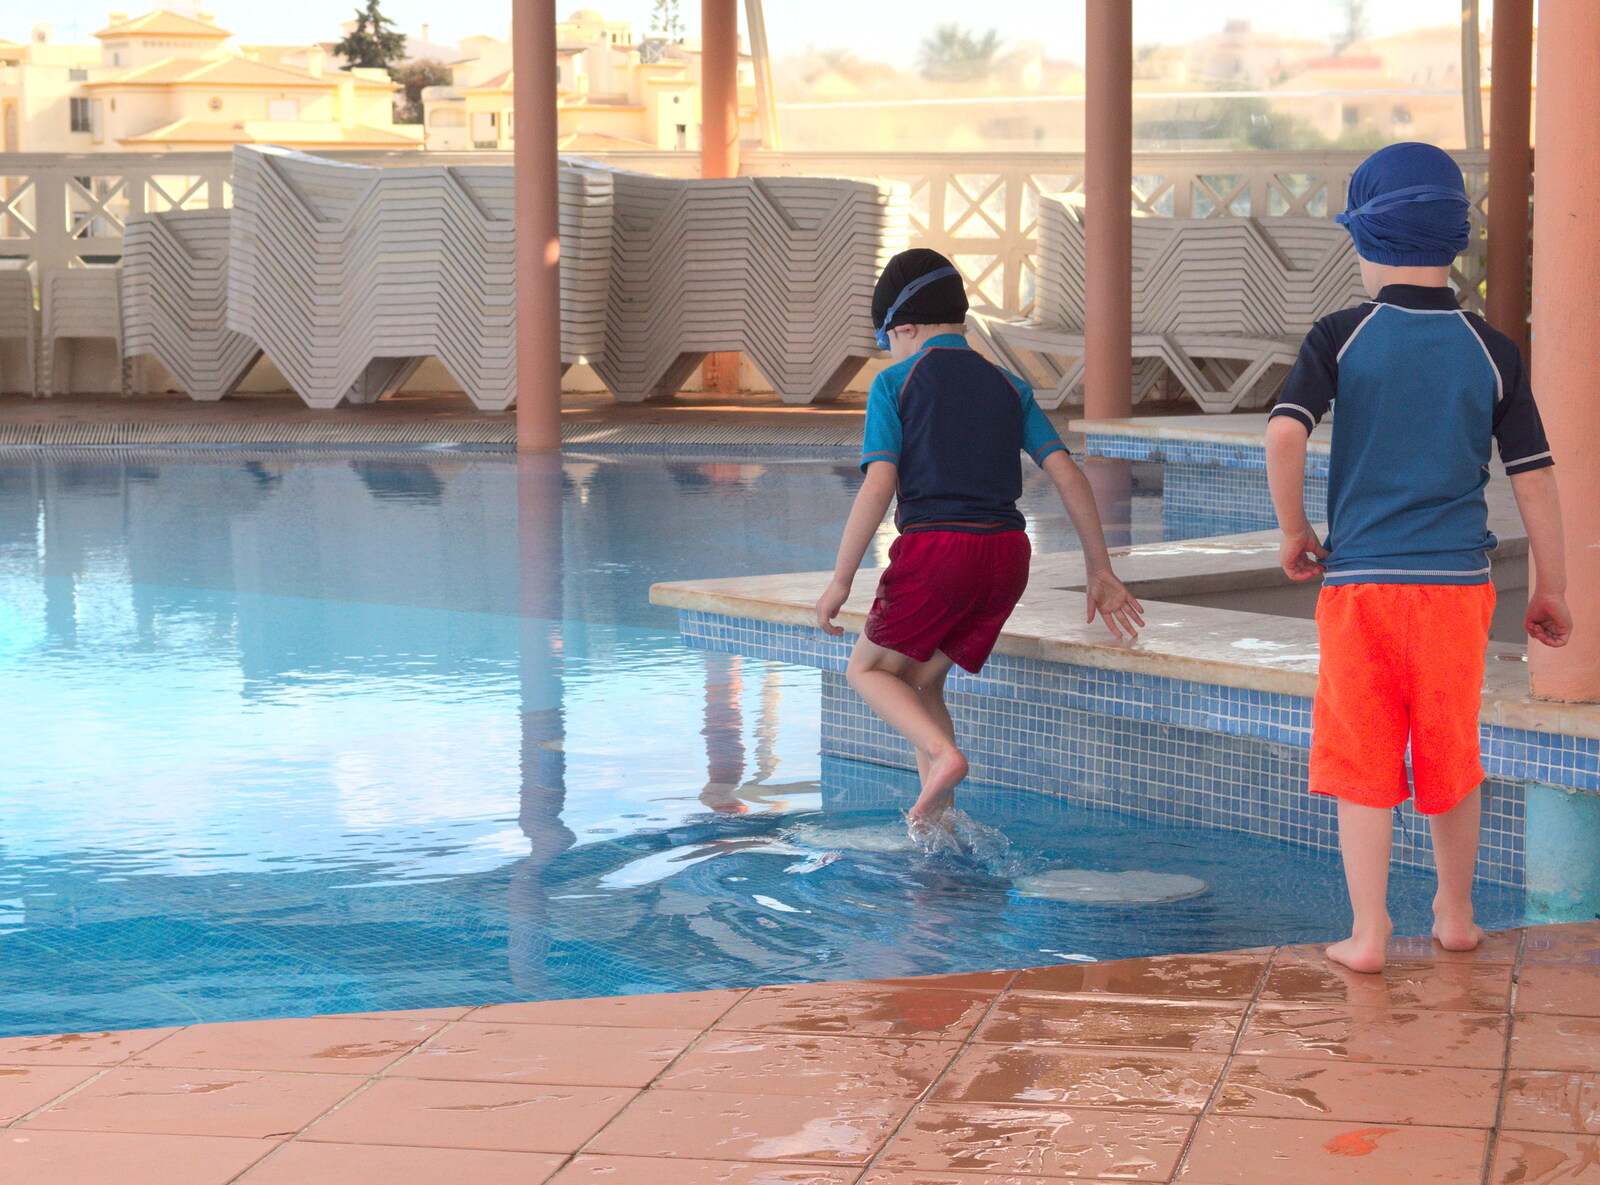 Fred and Harry explore the pool from A Trip to Albufeira: The Hotel Paraiso, Portugal - 3rd April 2016